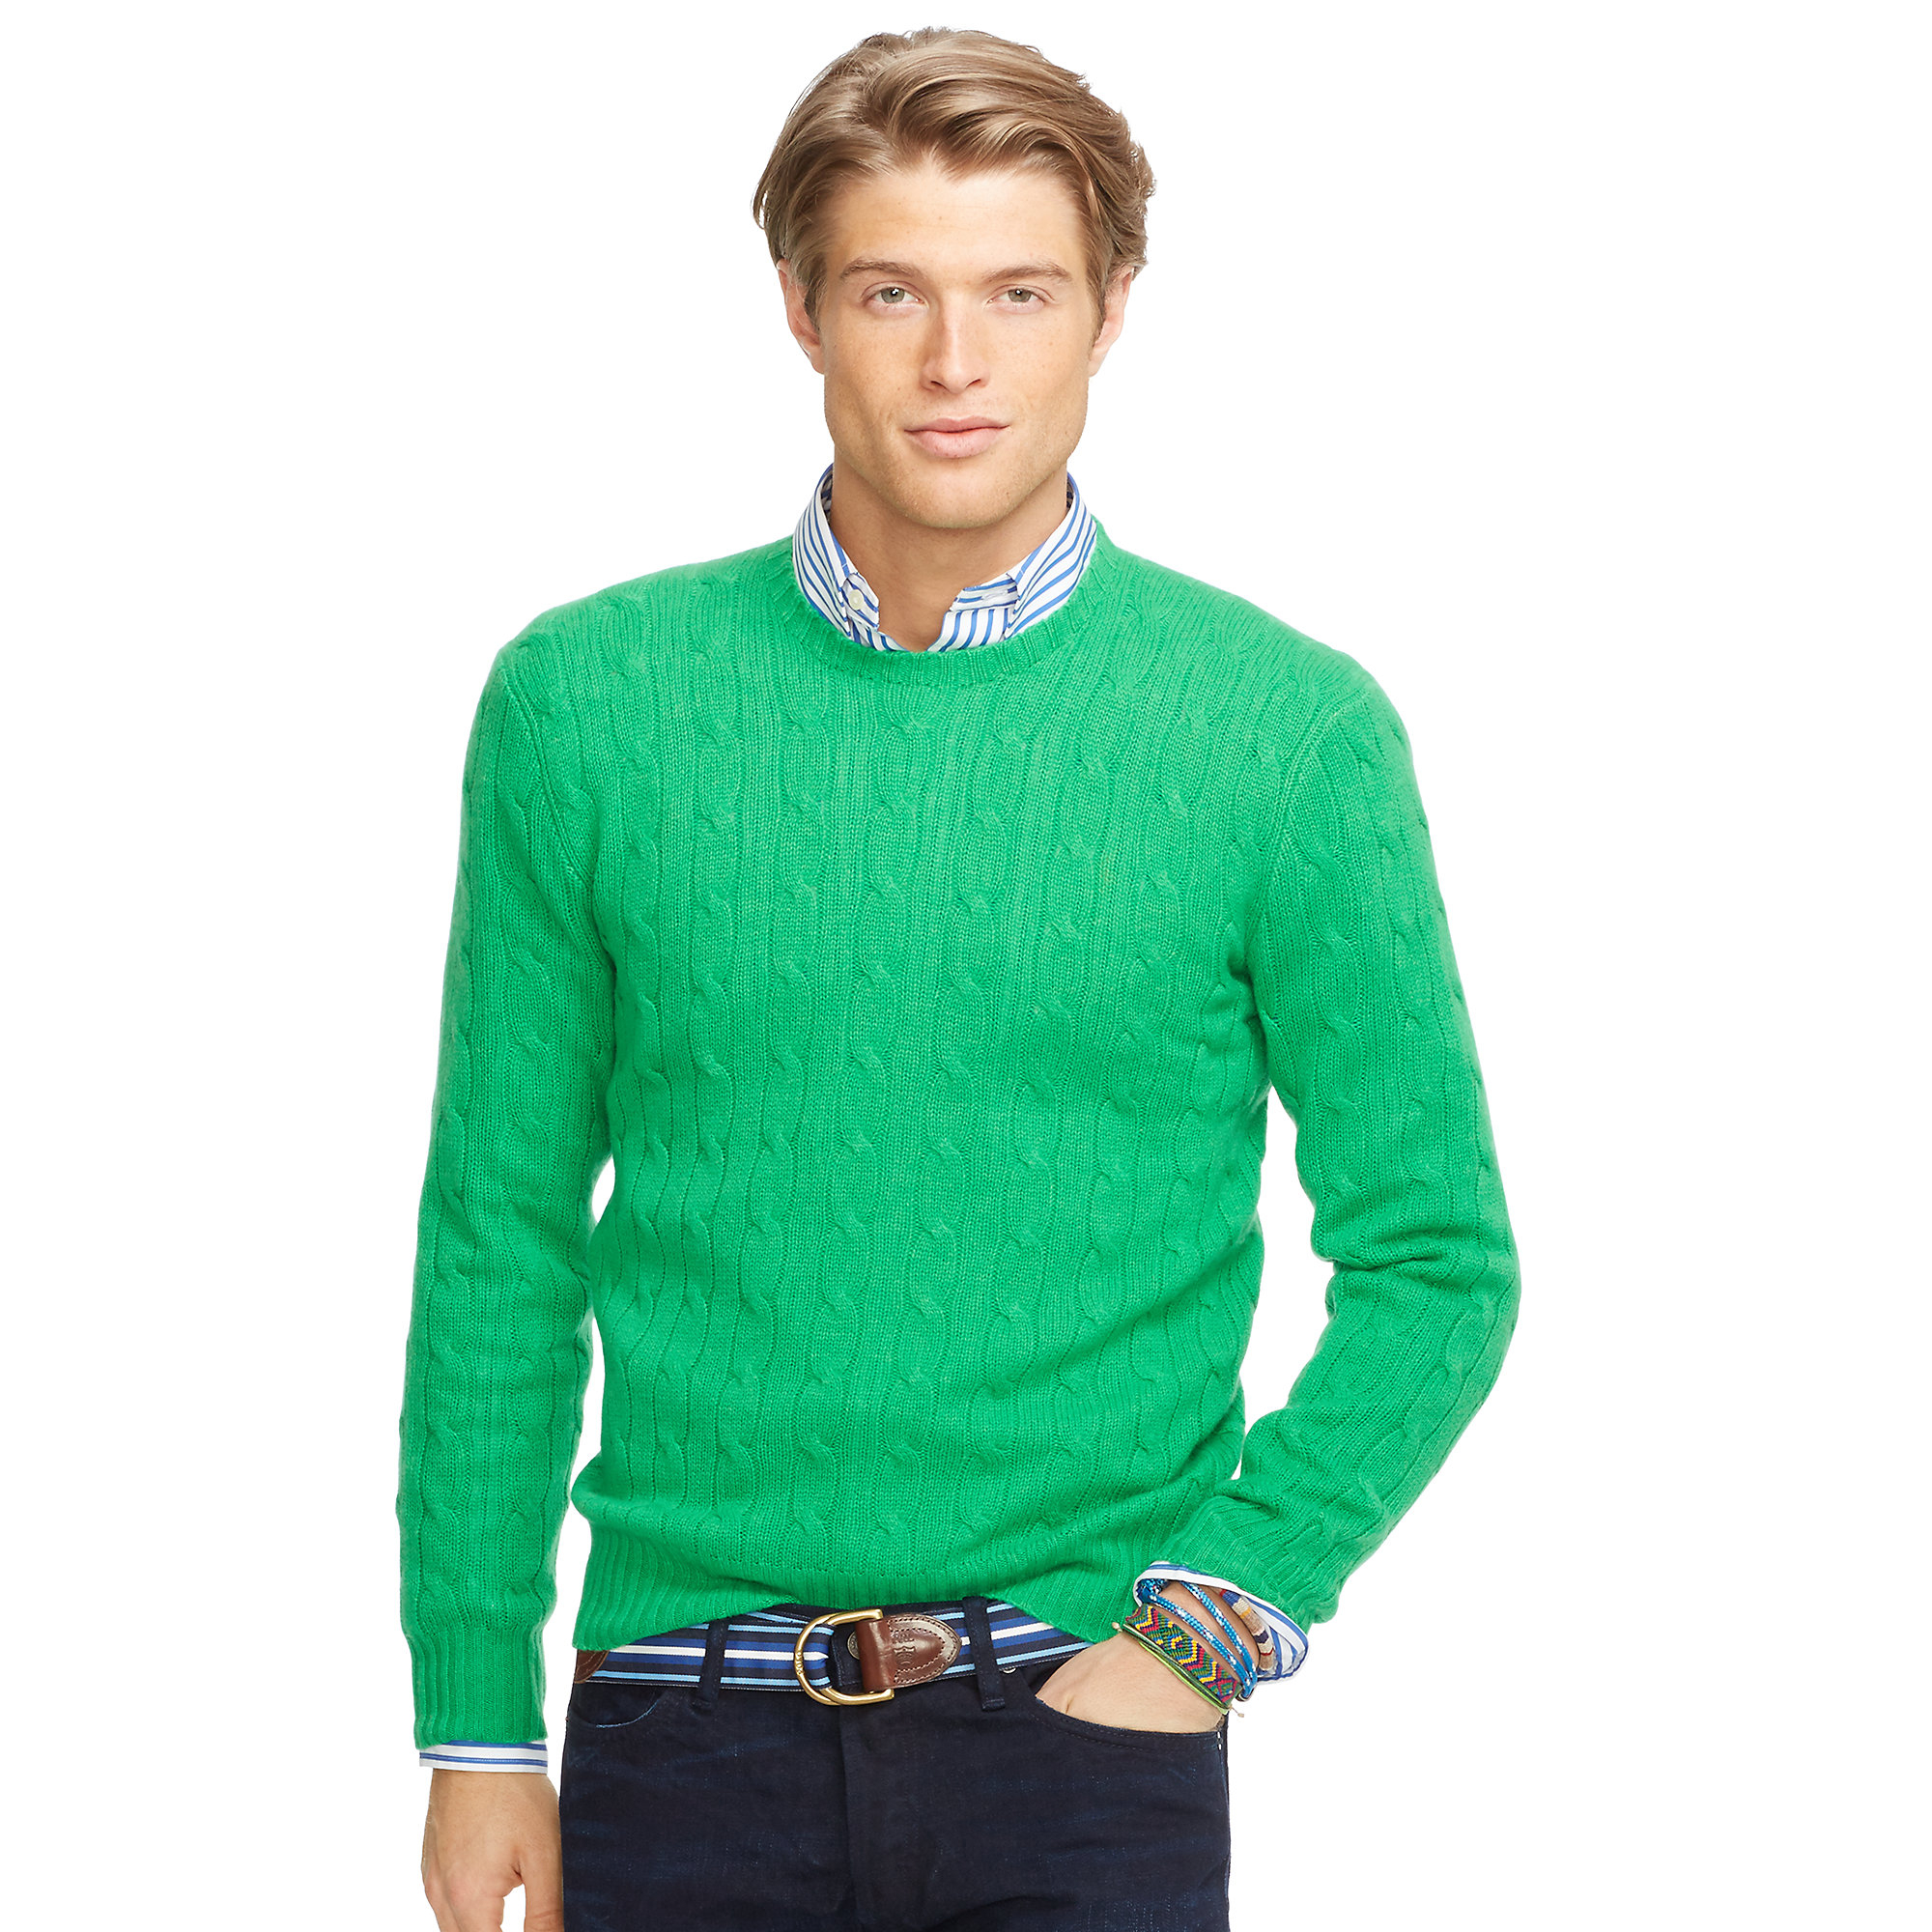 Ralph Lauren Cable Cashmere Sweater in Green for Men - Lyst